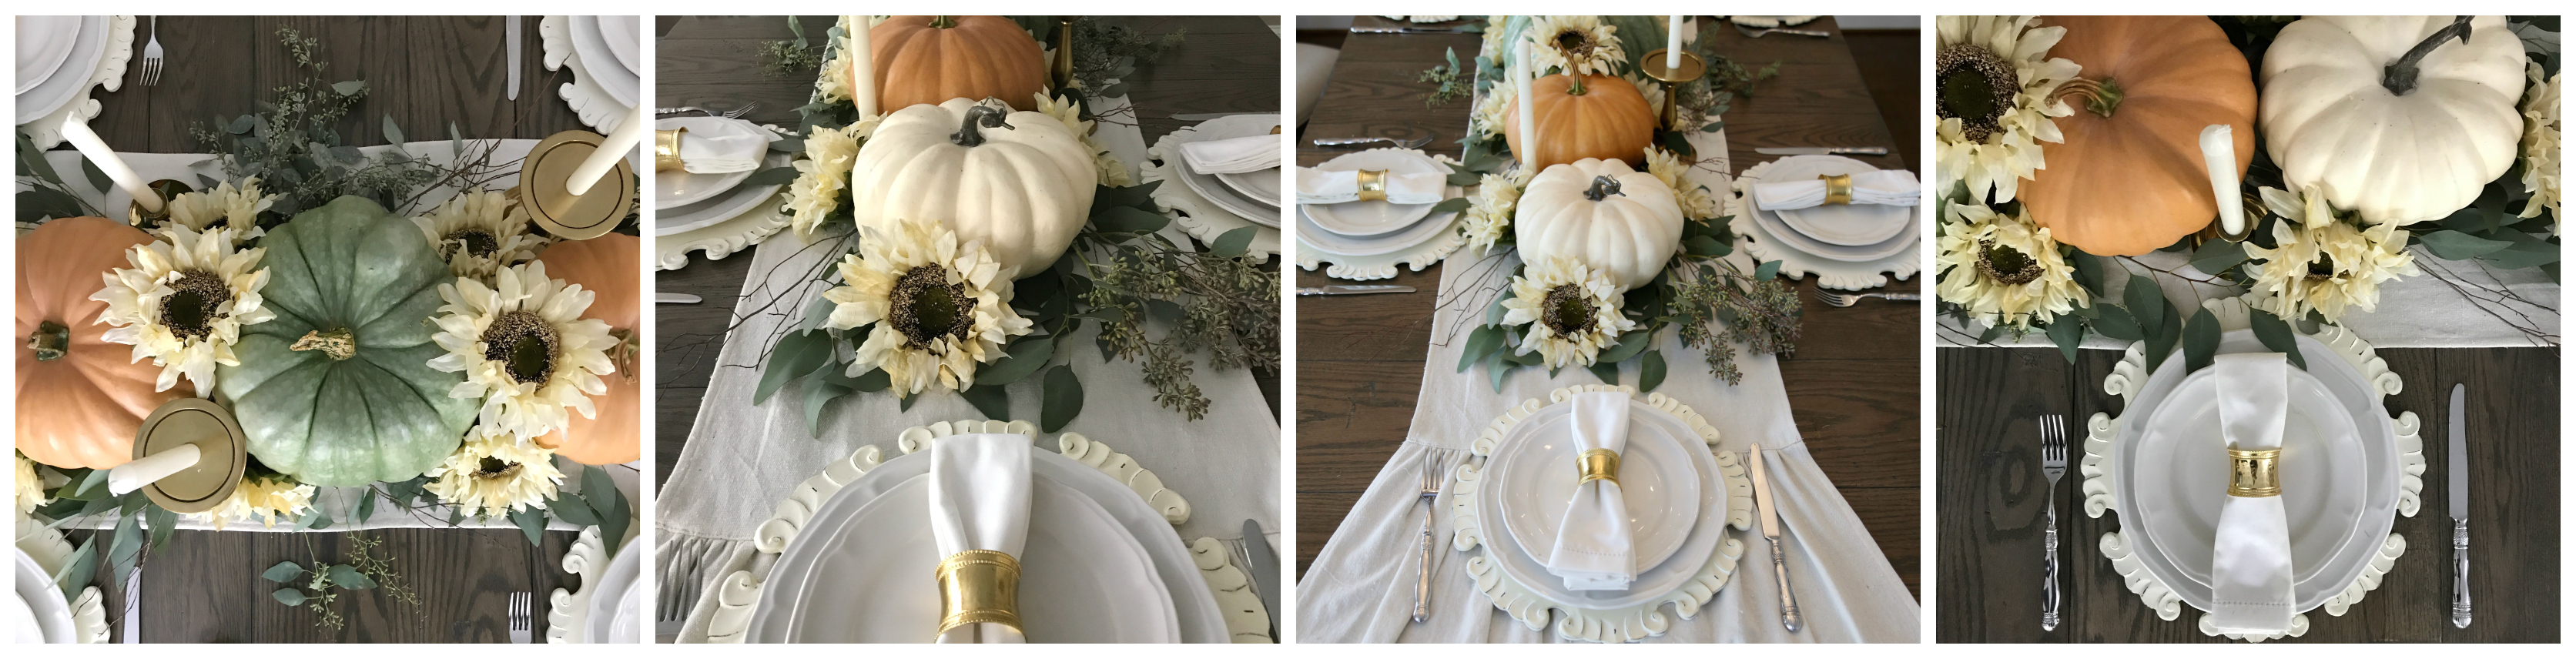 Dining Room- Fall Tablescapes_1